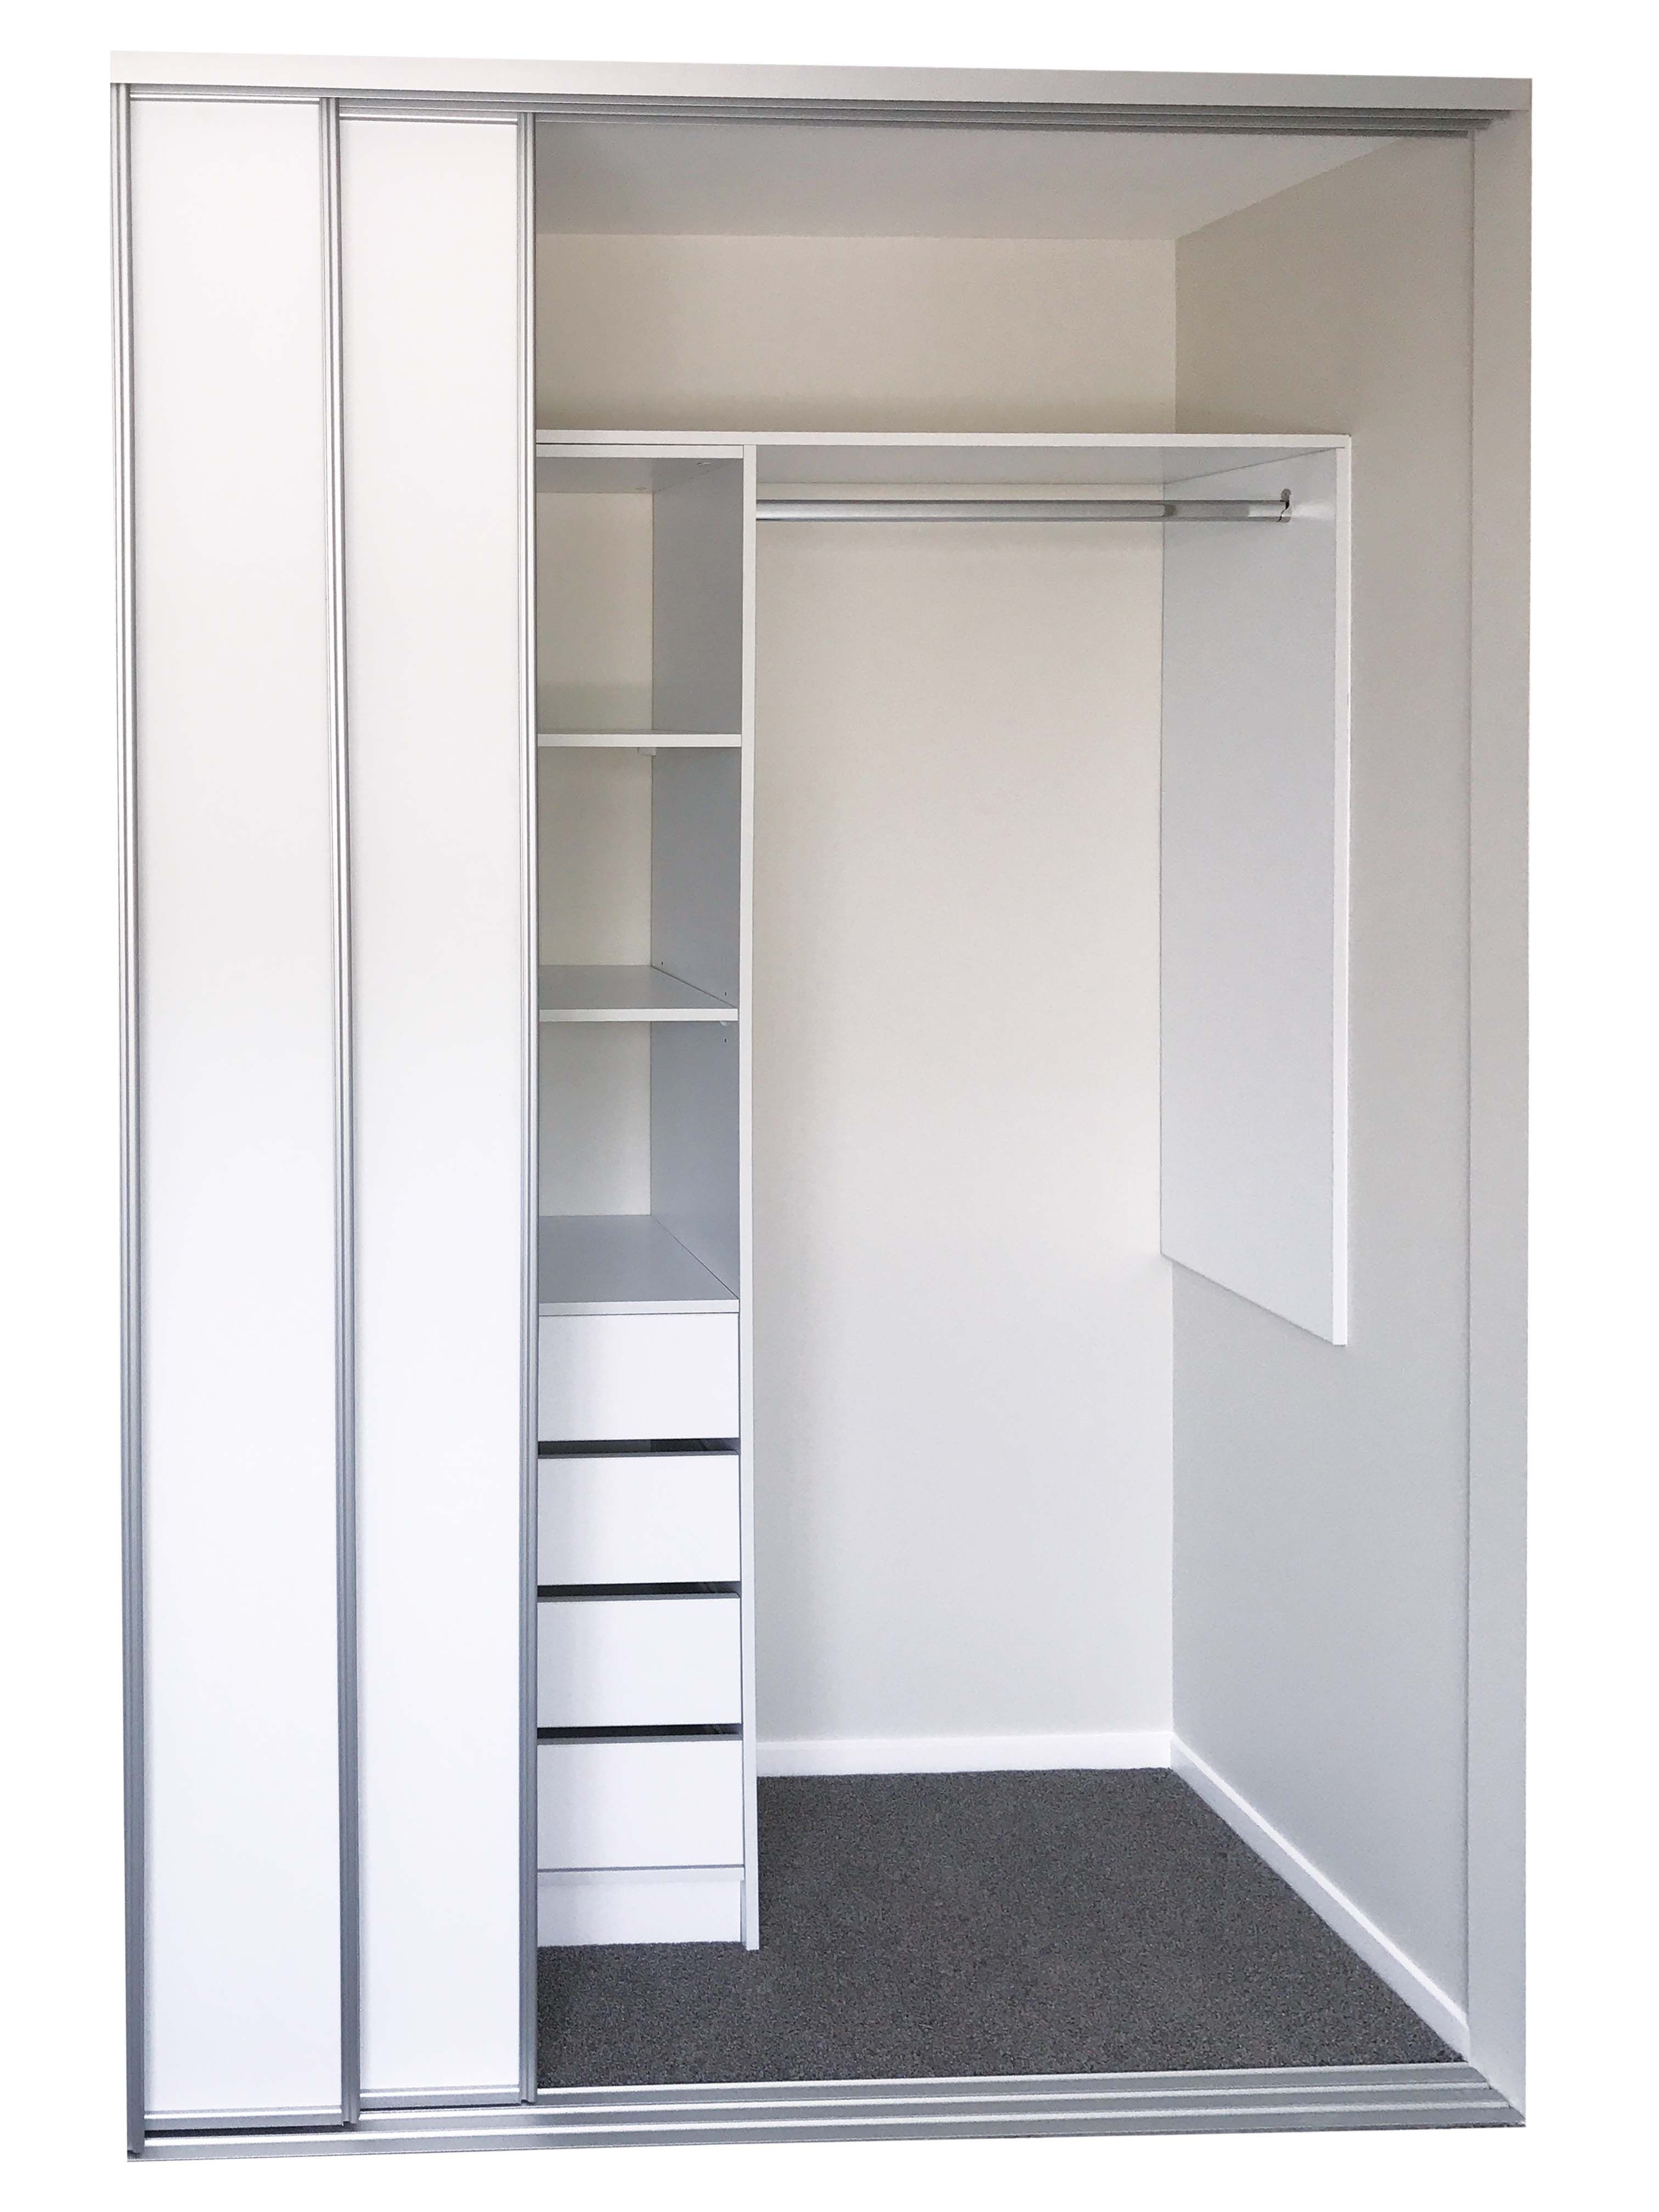 Genesis Modular Floor Standing Wardrobe Shelving | Showerwell Home Products In 3 Shelving Towers Wardrobes (Photo 6 of 15)